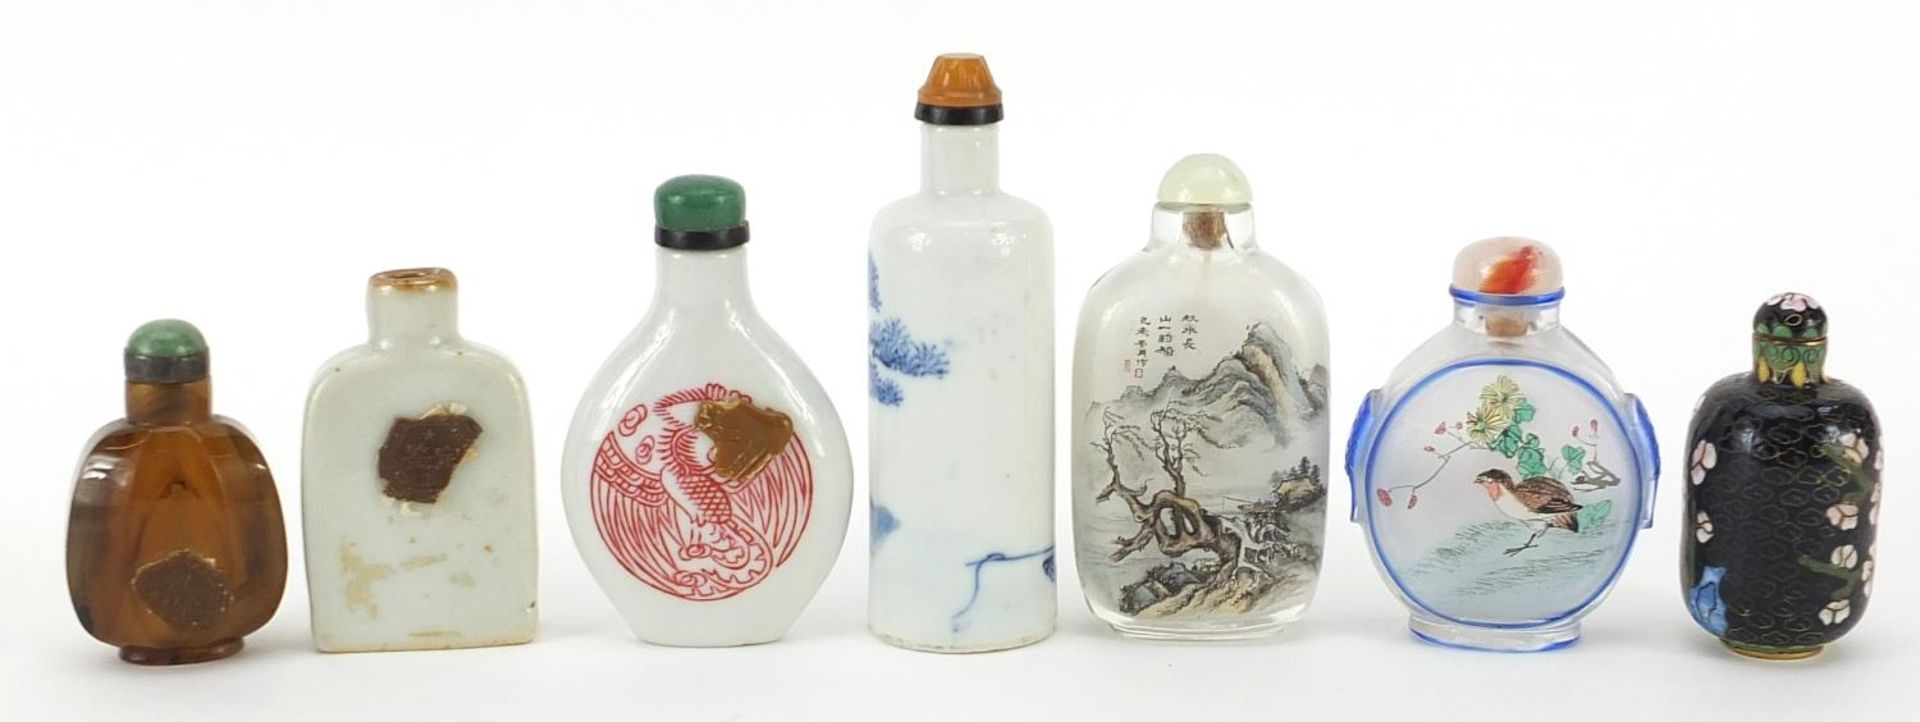 Chinese snuff bottles including internally hand painted, cloisonne and porcelain examples, the - Image 4 of 7